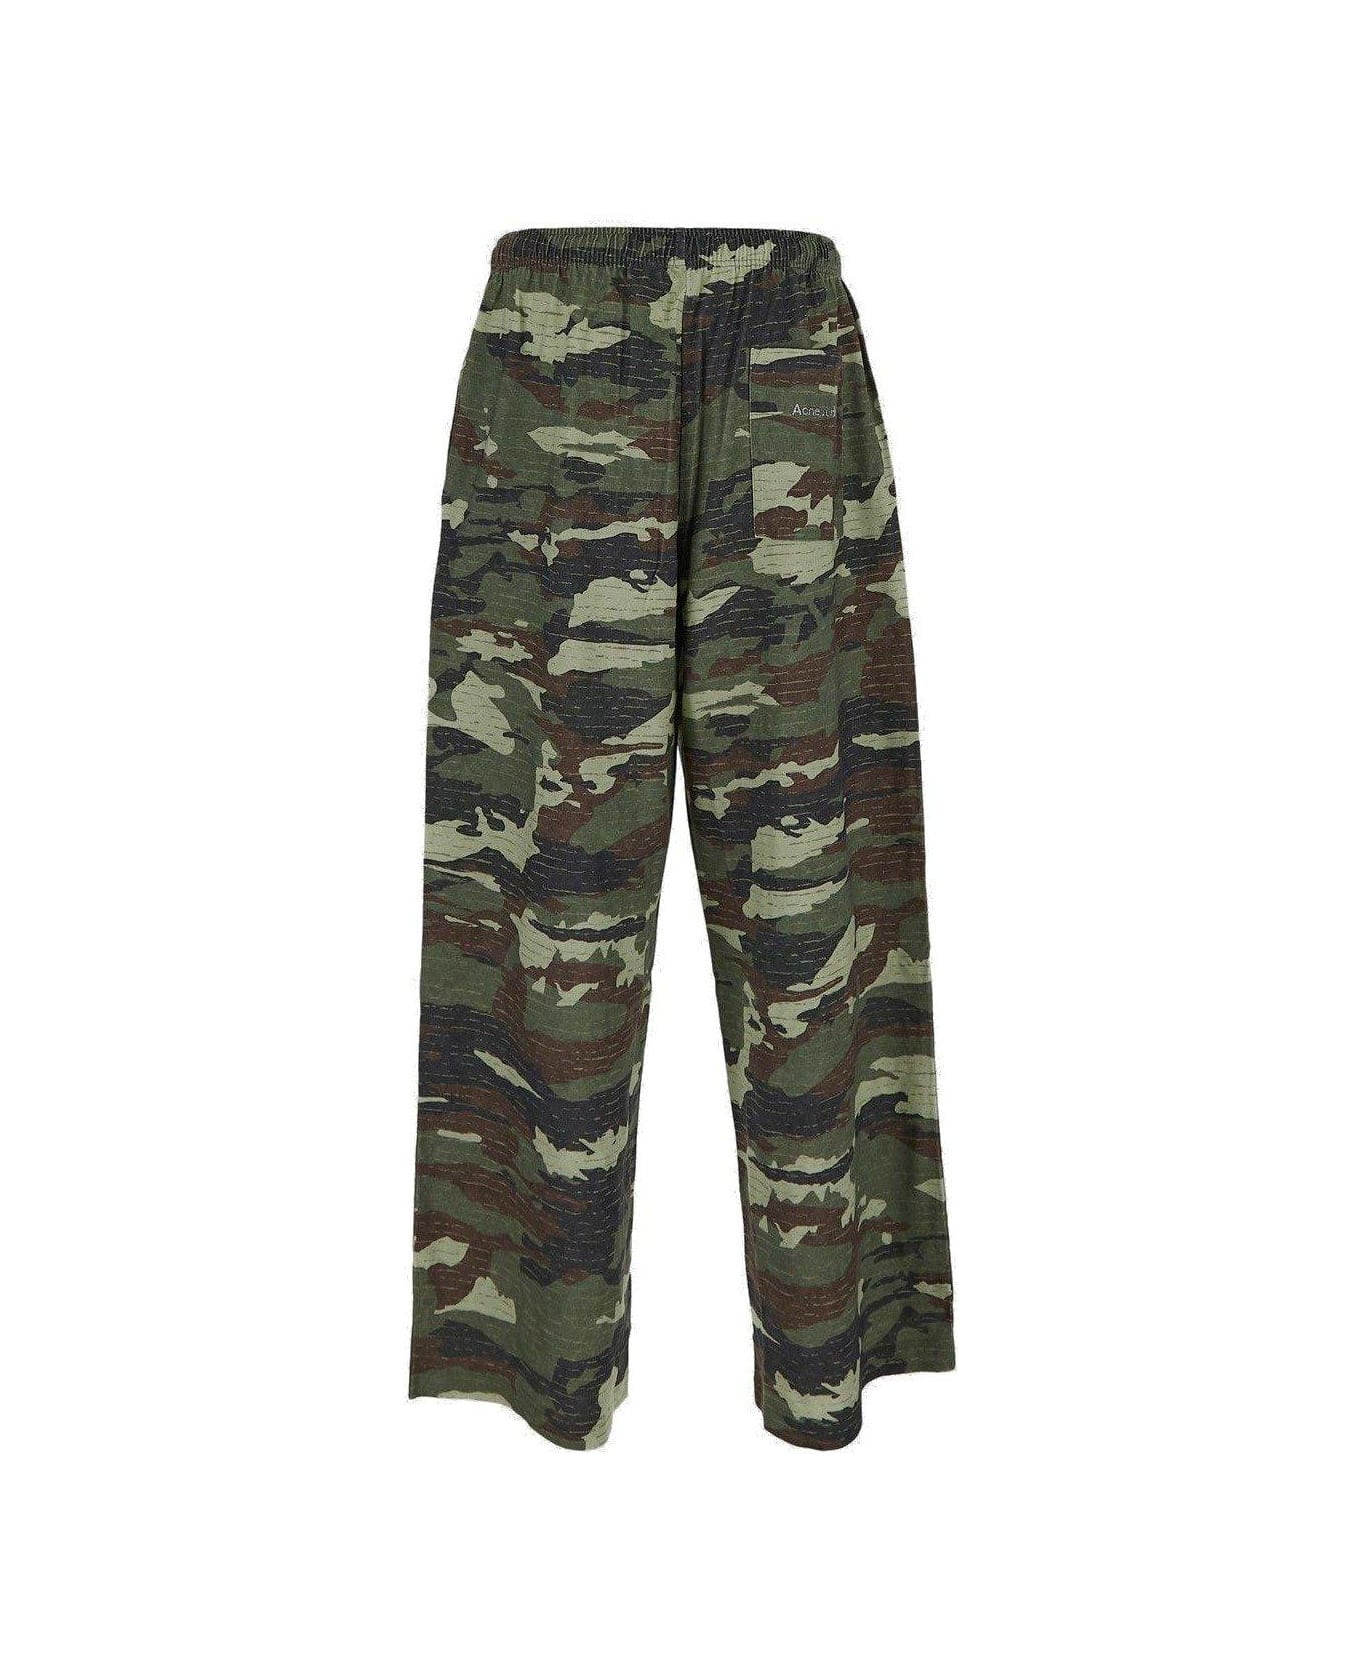 Acne Studios Camouflage Patterned Relaxed-fit Pants - Green